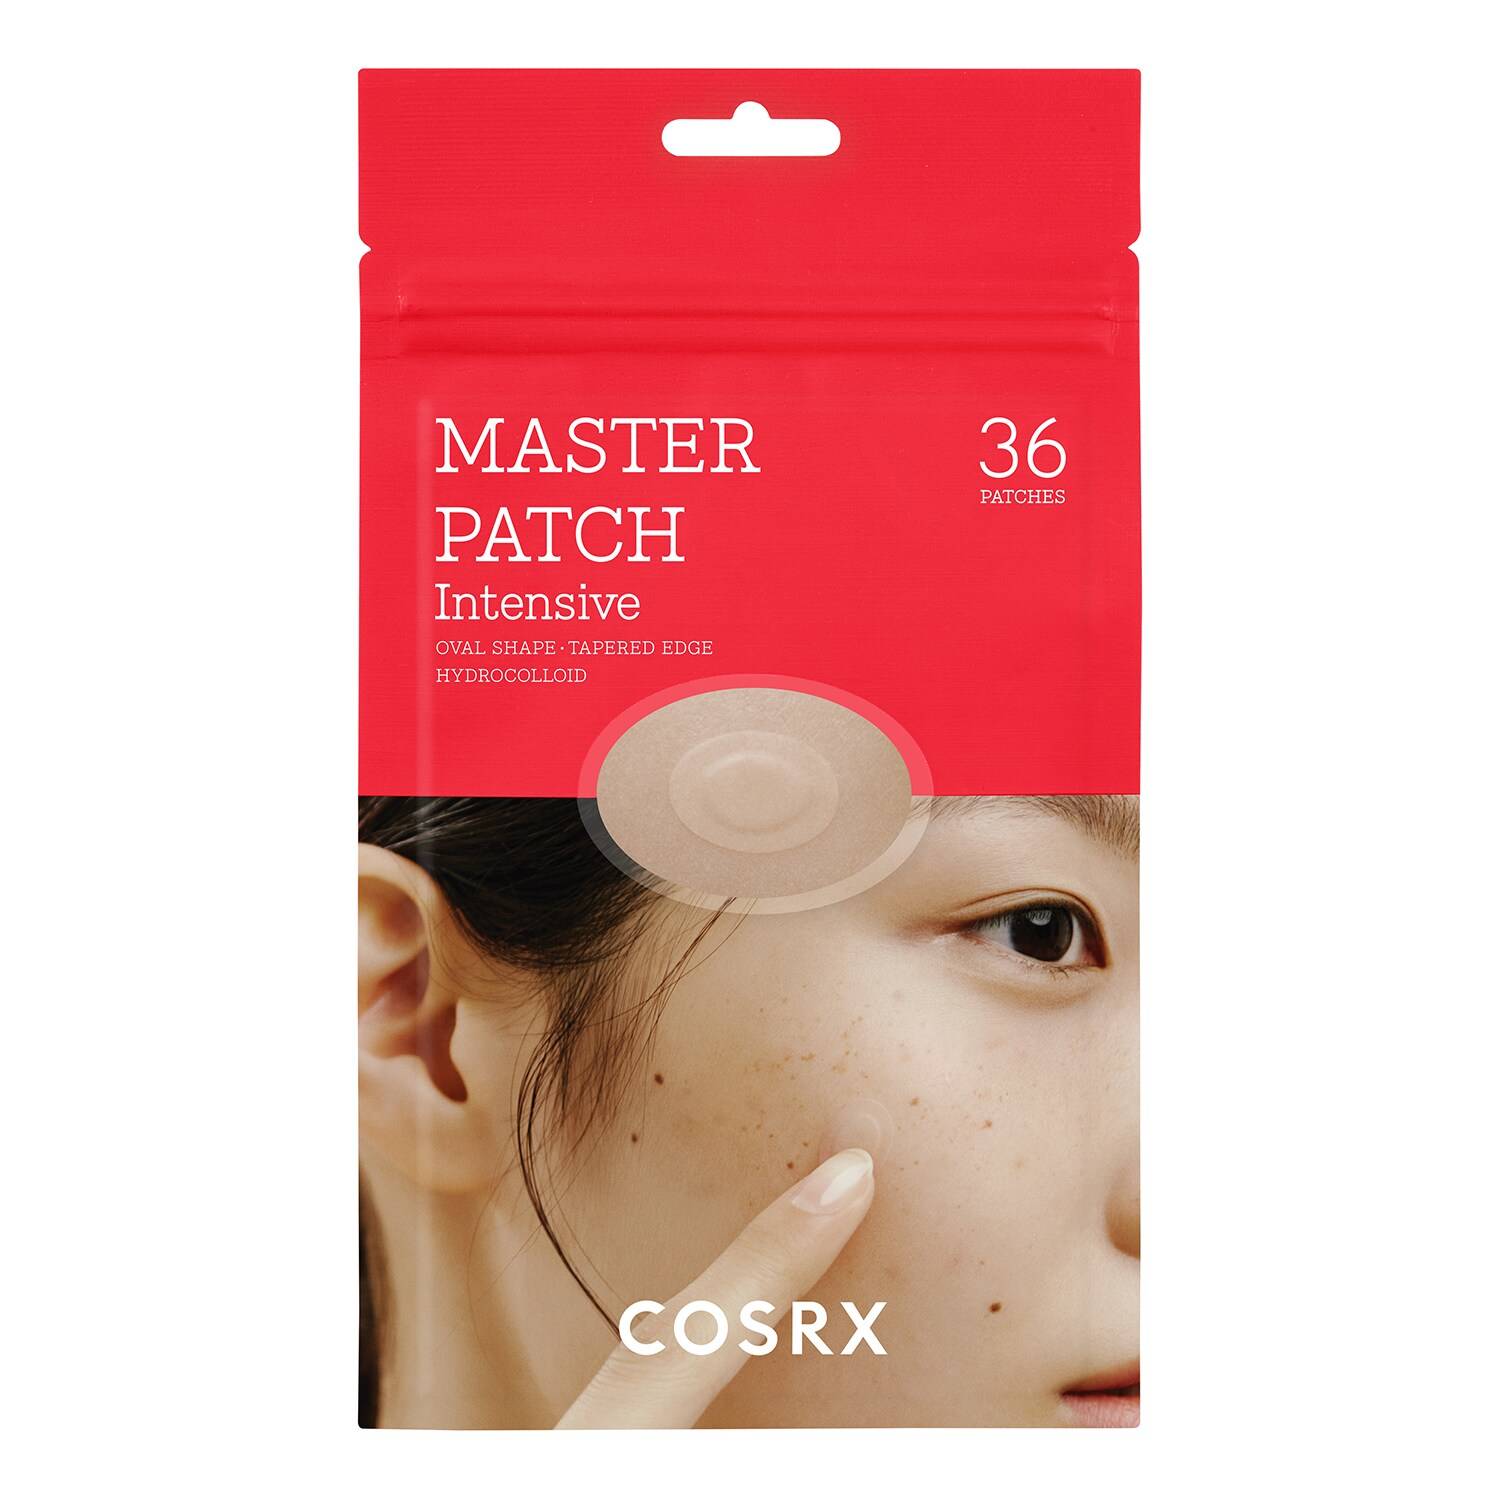 COSRX Patches Master Intensive 36 Patches